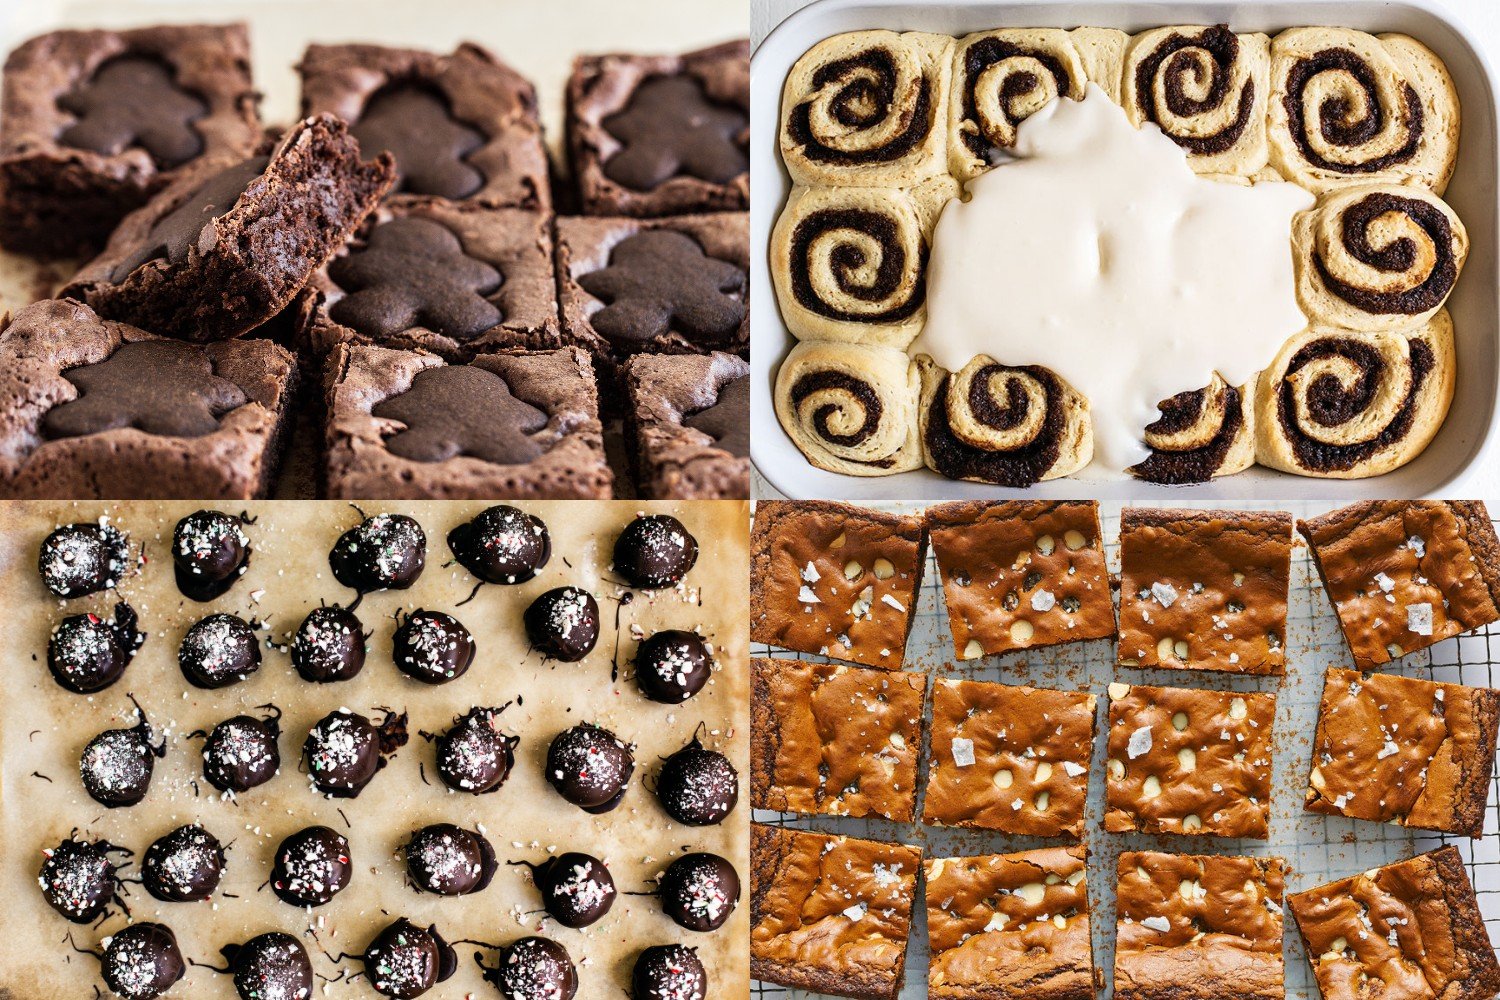 four Christmas in July recipes: gingerbread brownies, cinnamon rolls, truffles, and gingerbread blondies.